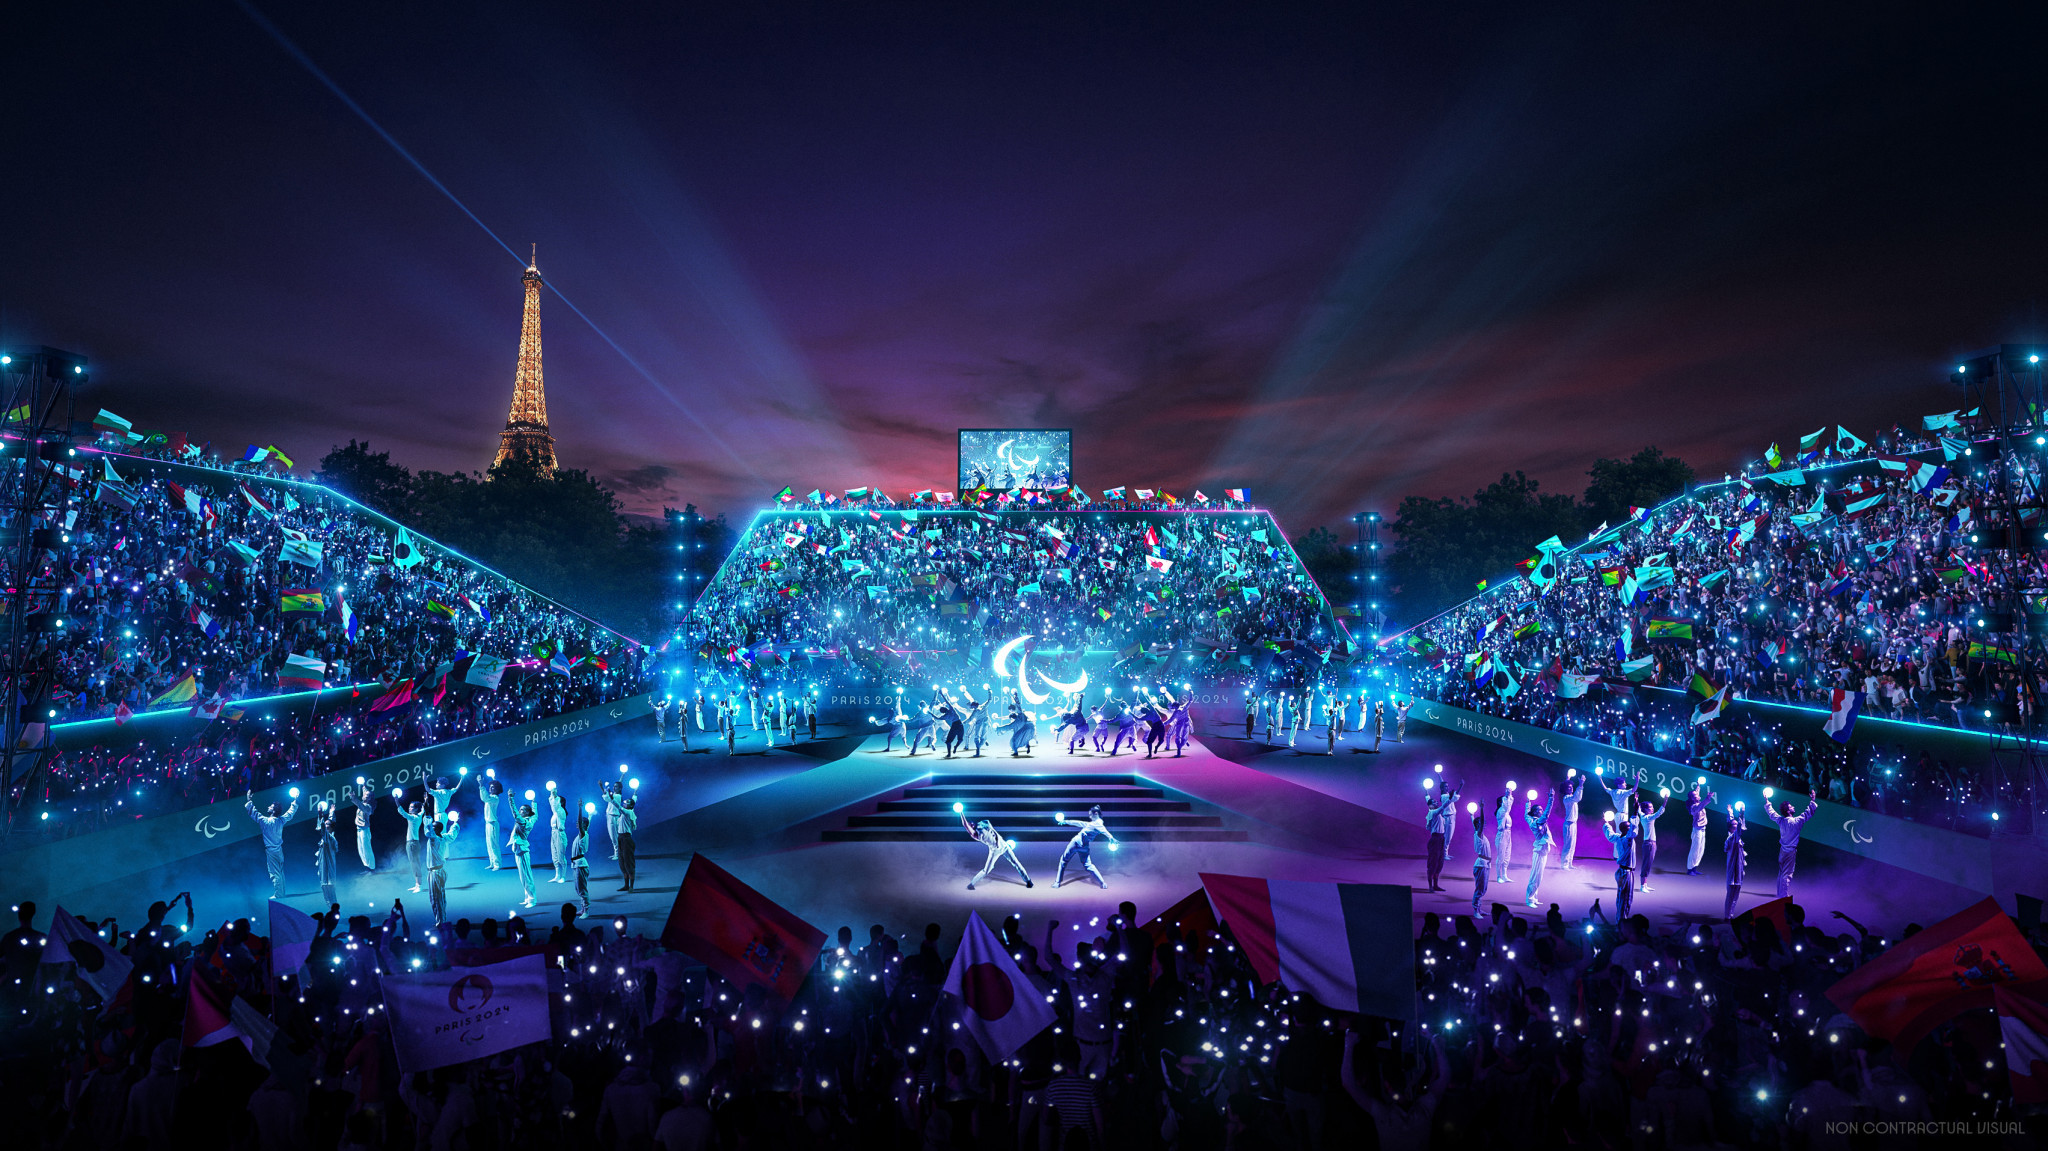 Paris 2024 organisers have revealed that the ceremony is expected to have performances in a multi-stage format ©Paris 2024